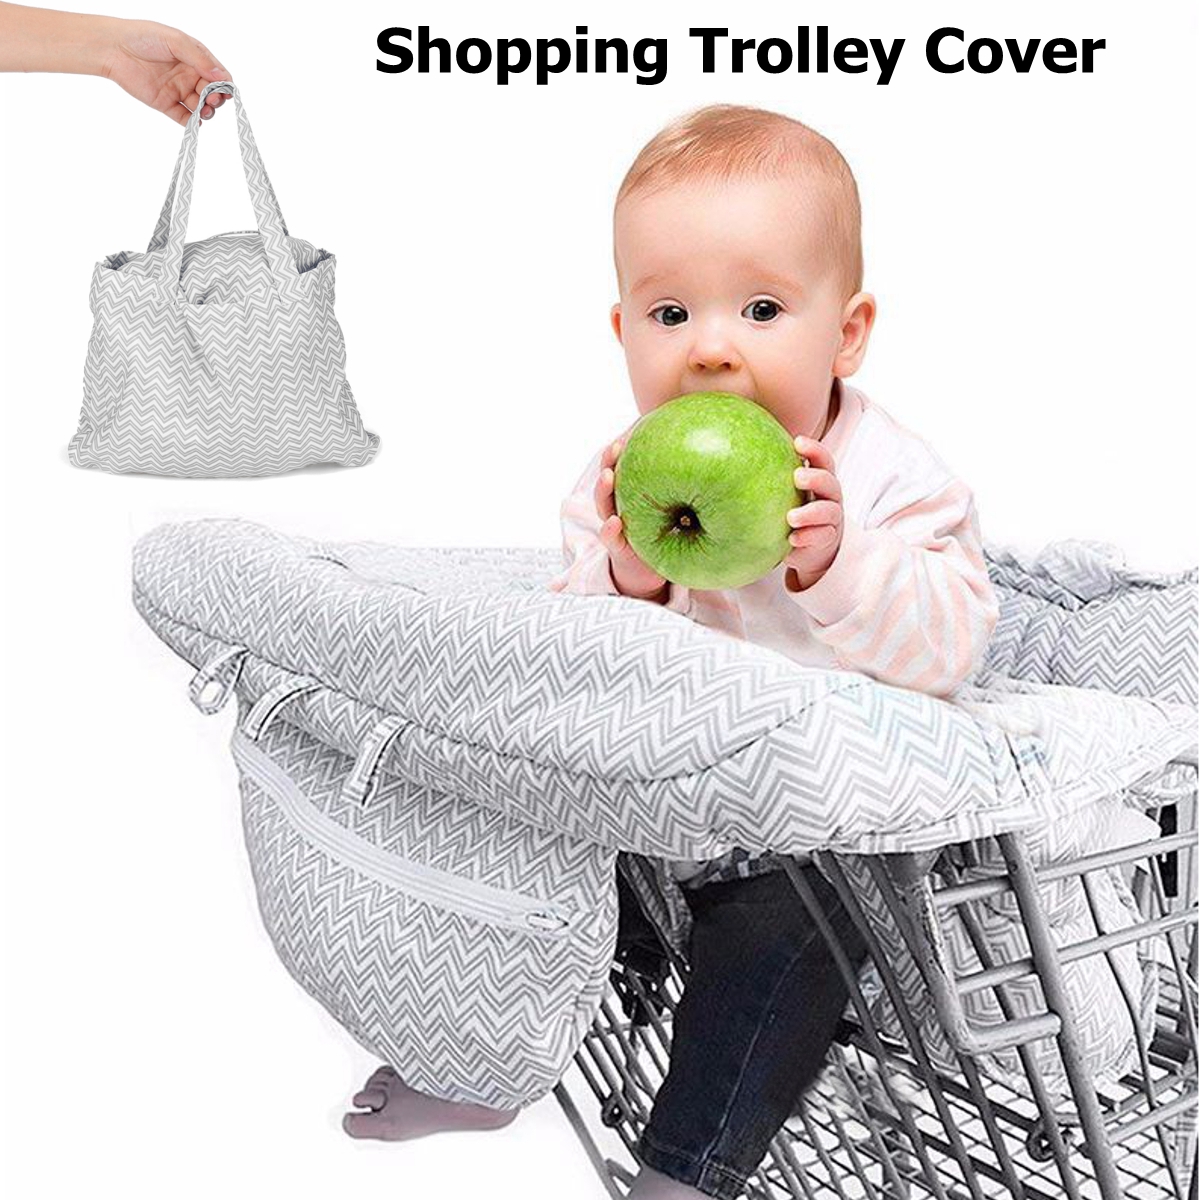 2-in-1 High Chair Cover Compact Universal Fit Fits Restaurant Highchair Includes Carry Bag Unisex for Boy or Girl Machine Washable Shopping Cart Cover for Baby or Toddler